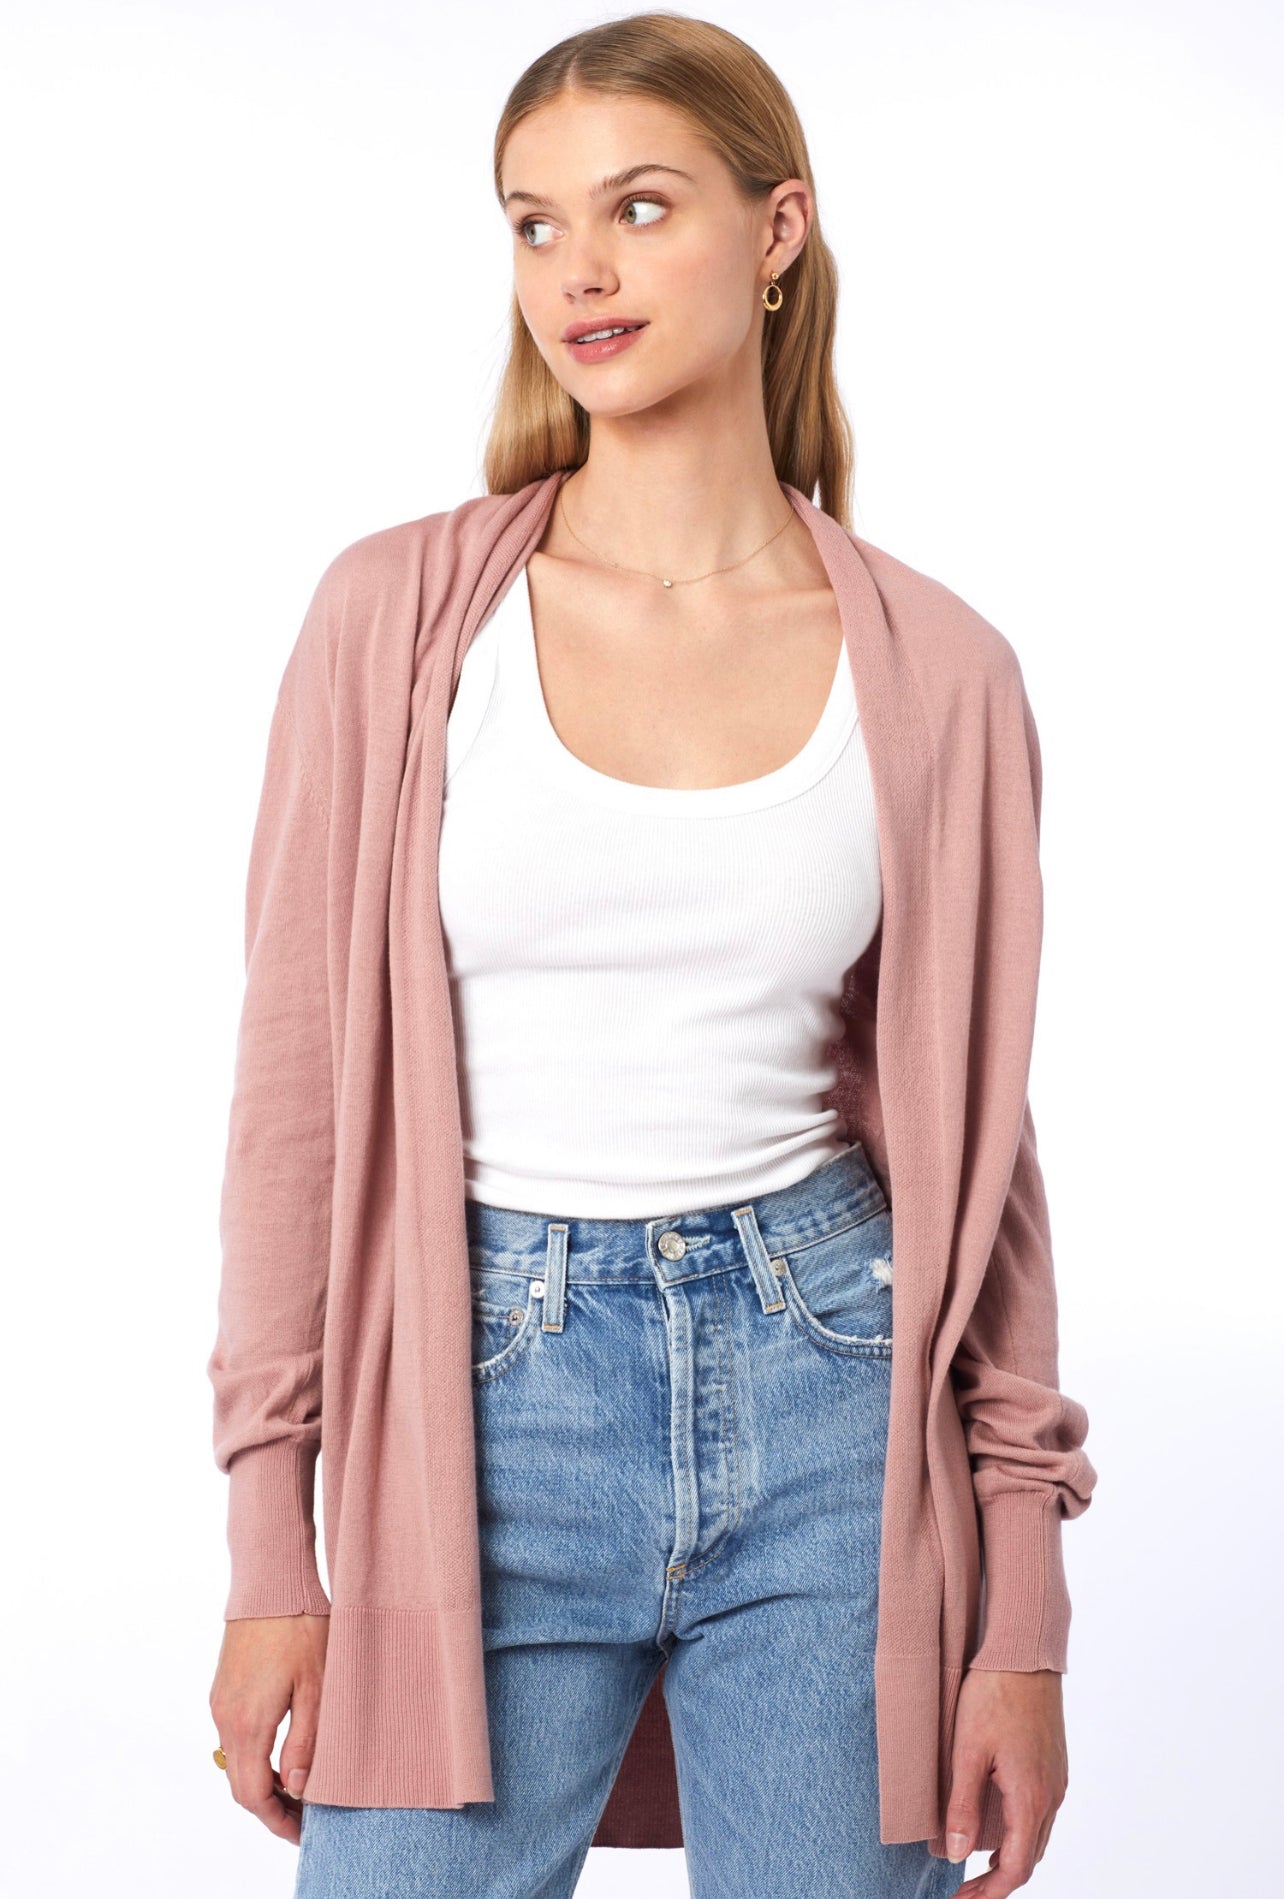 Blissed Out Cardigan - Dusty Rose